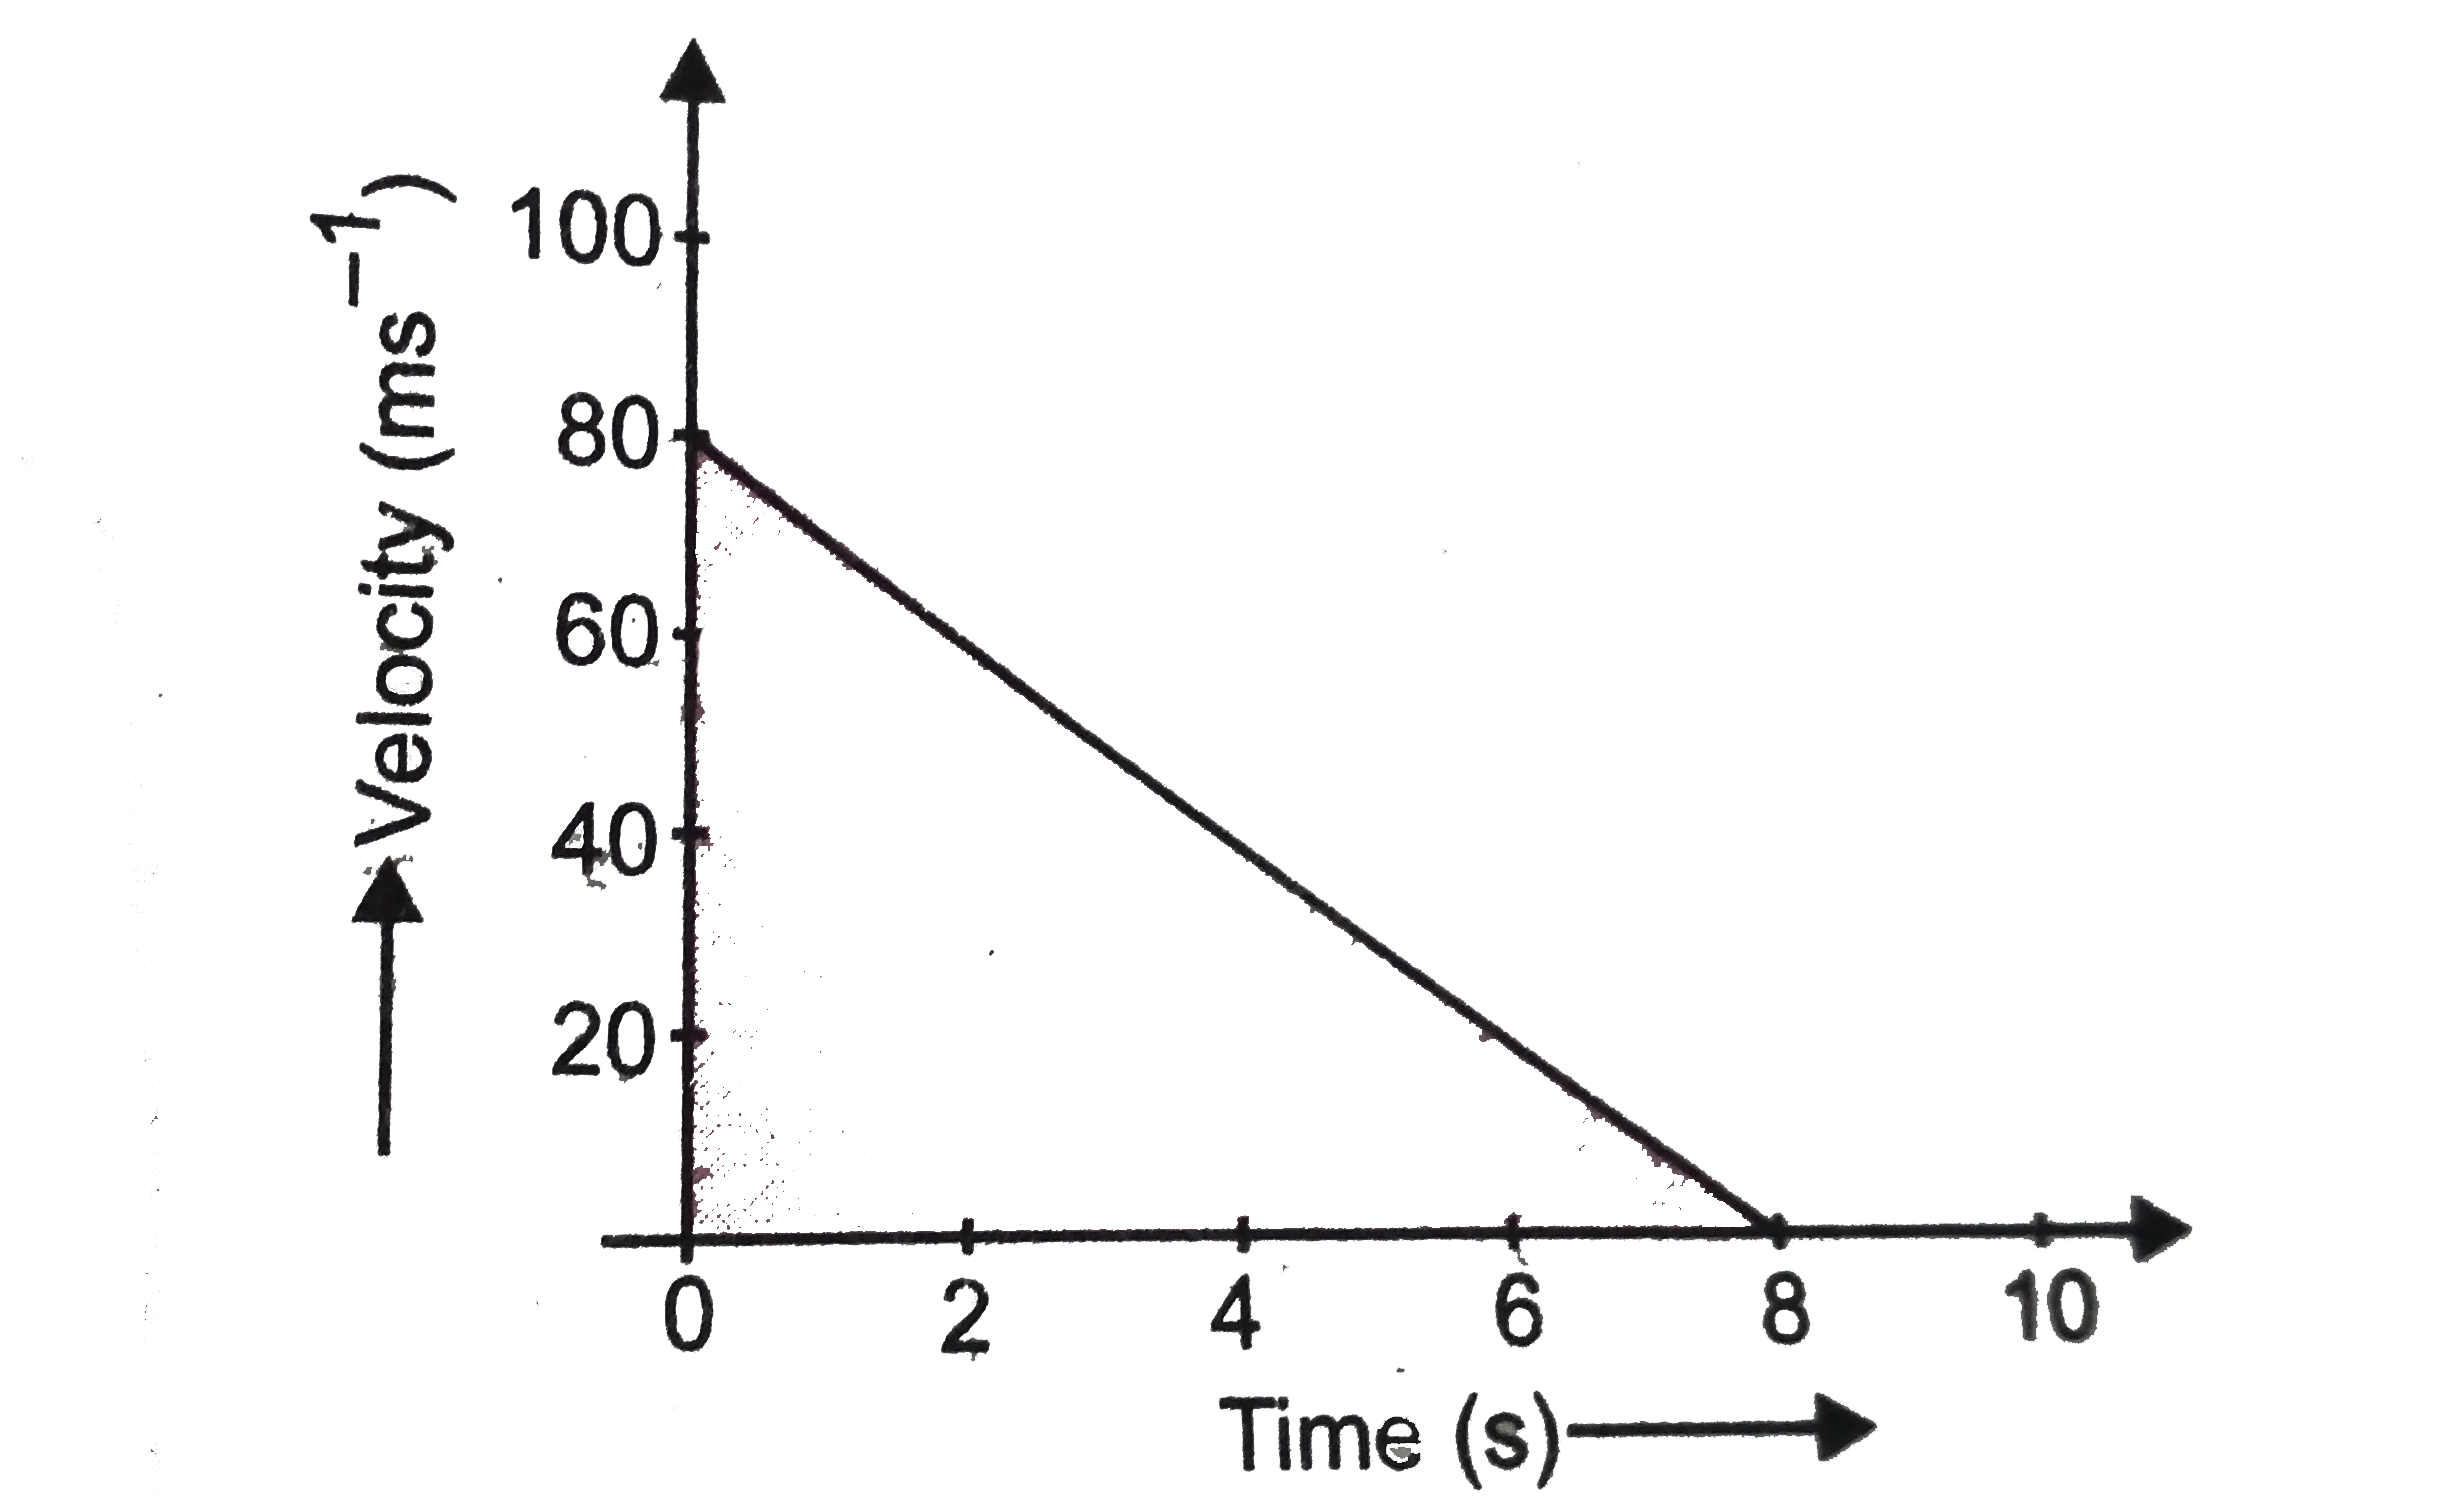 Velocity versus time graph of a ball of mass 50g rolling on a concrete floor shown in (figure) Calcualte the acceleration and frictional force of the floor on the ball.